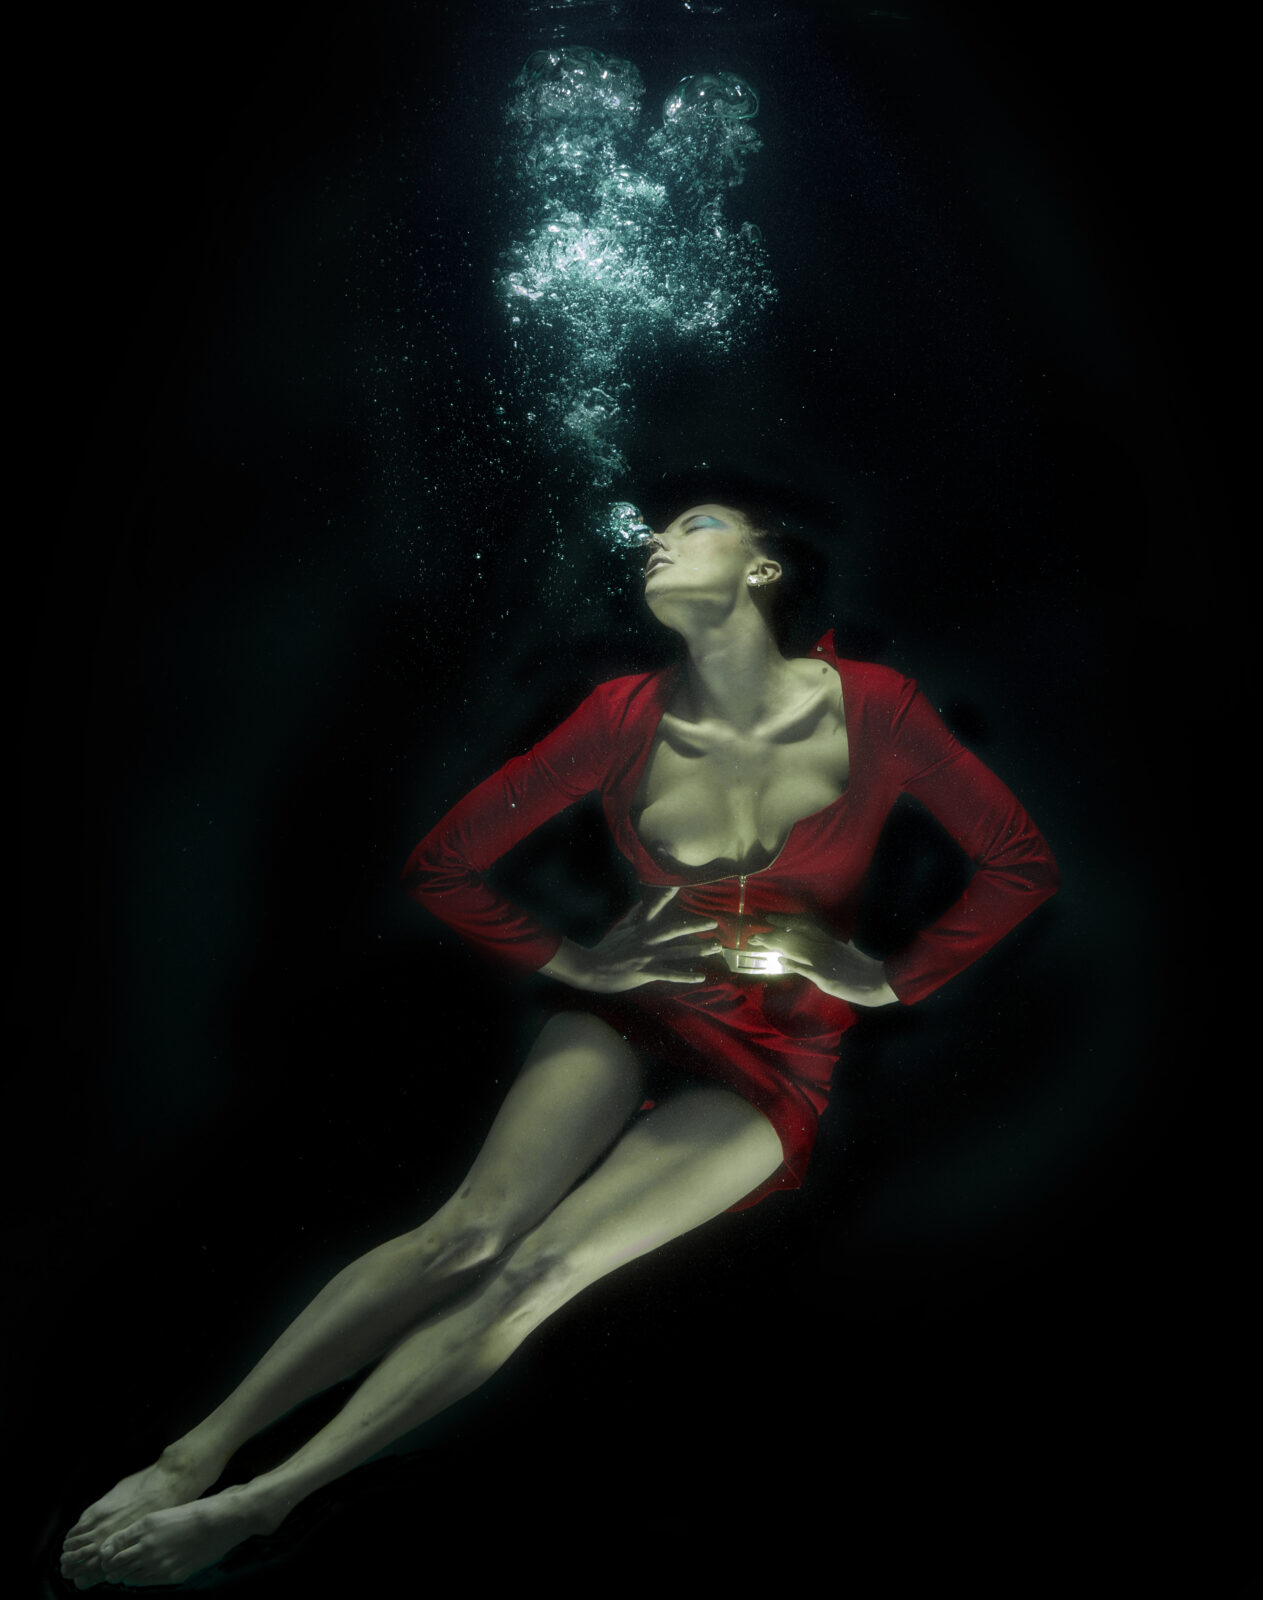 woman in red dress submerged in water fantasy fine art